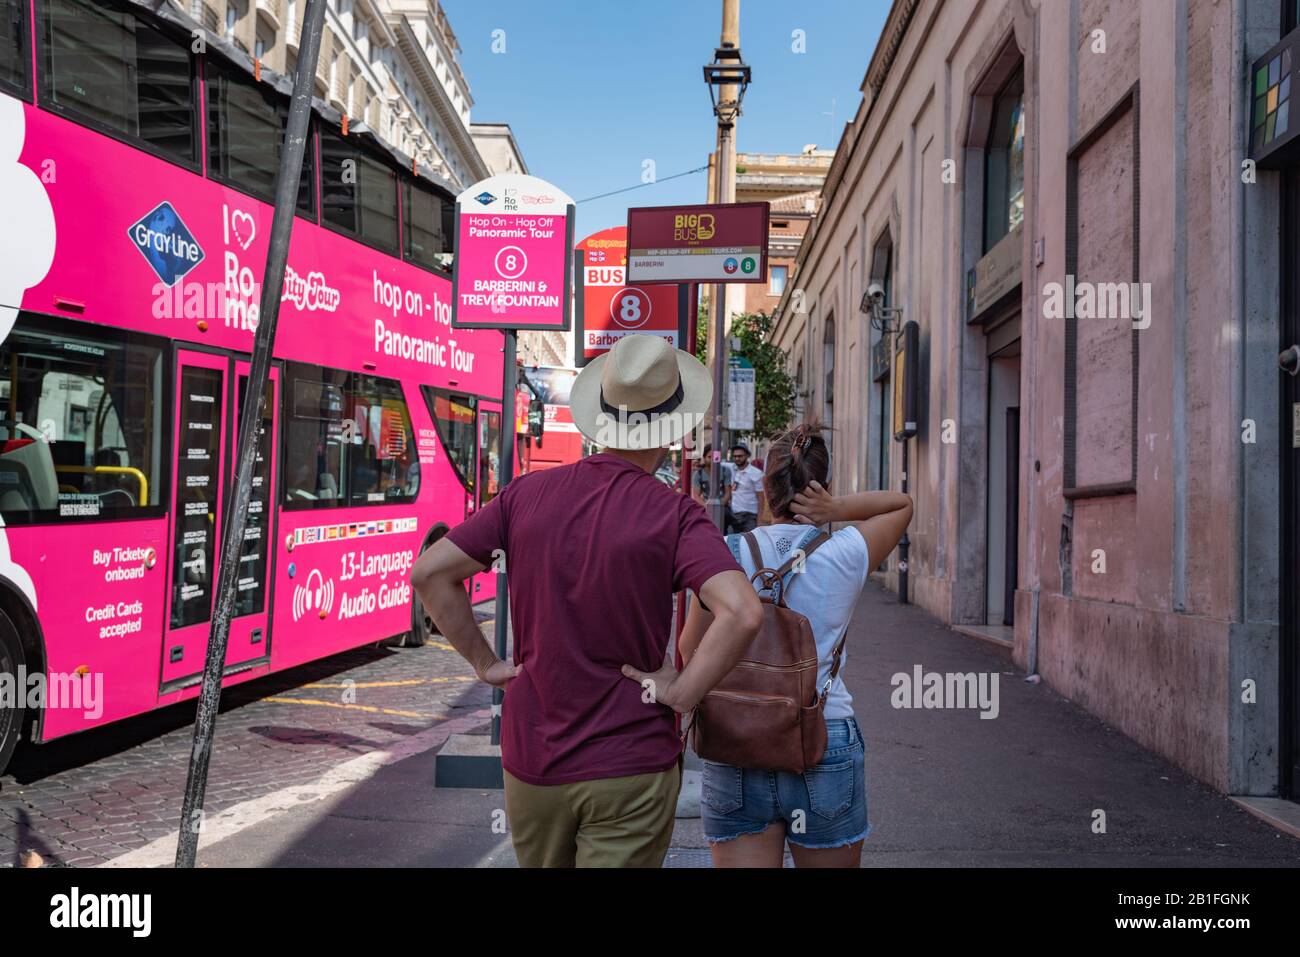 Rome, Italy - September 5, 2019: Couple of tourists waiting for a bus on bus station via Piazza Barberini. Two floor pink bus on background. Stock Photo